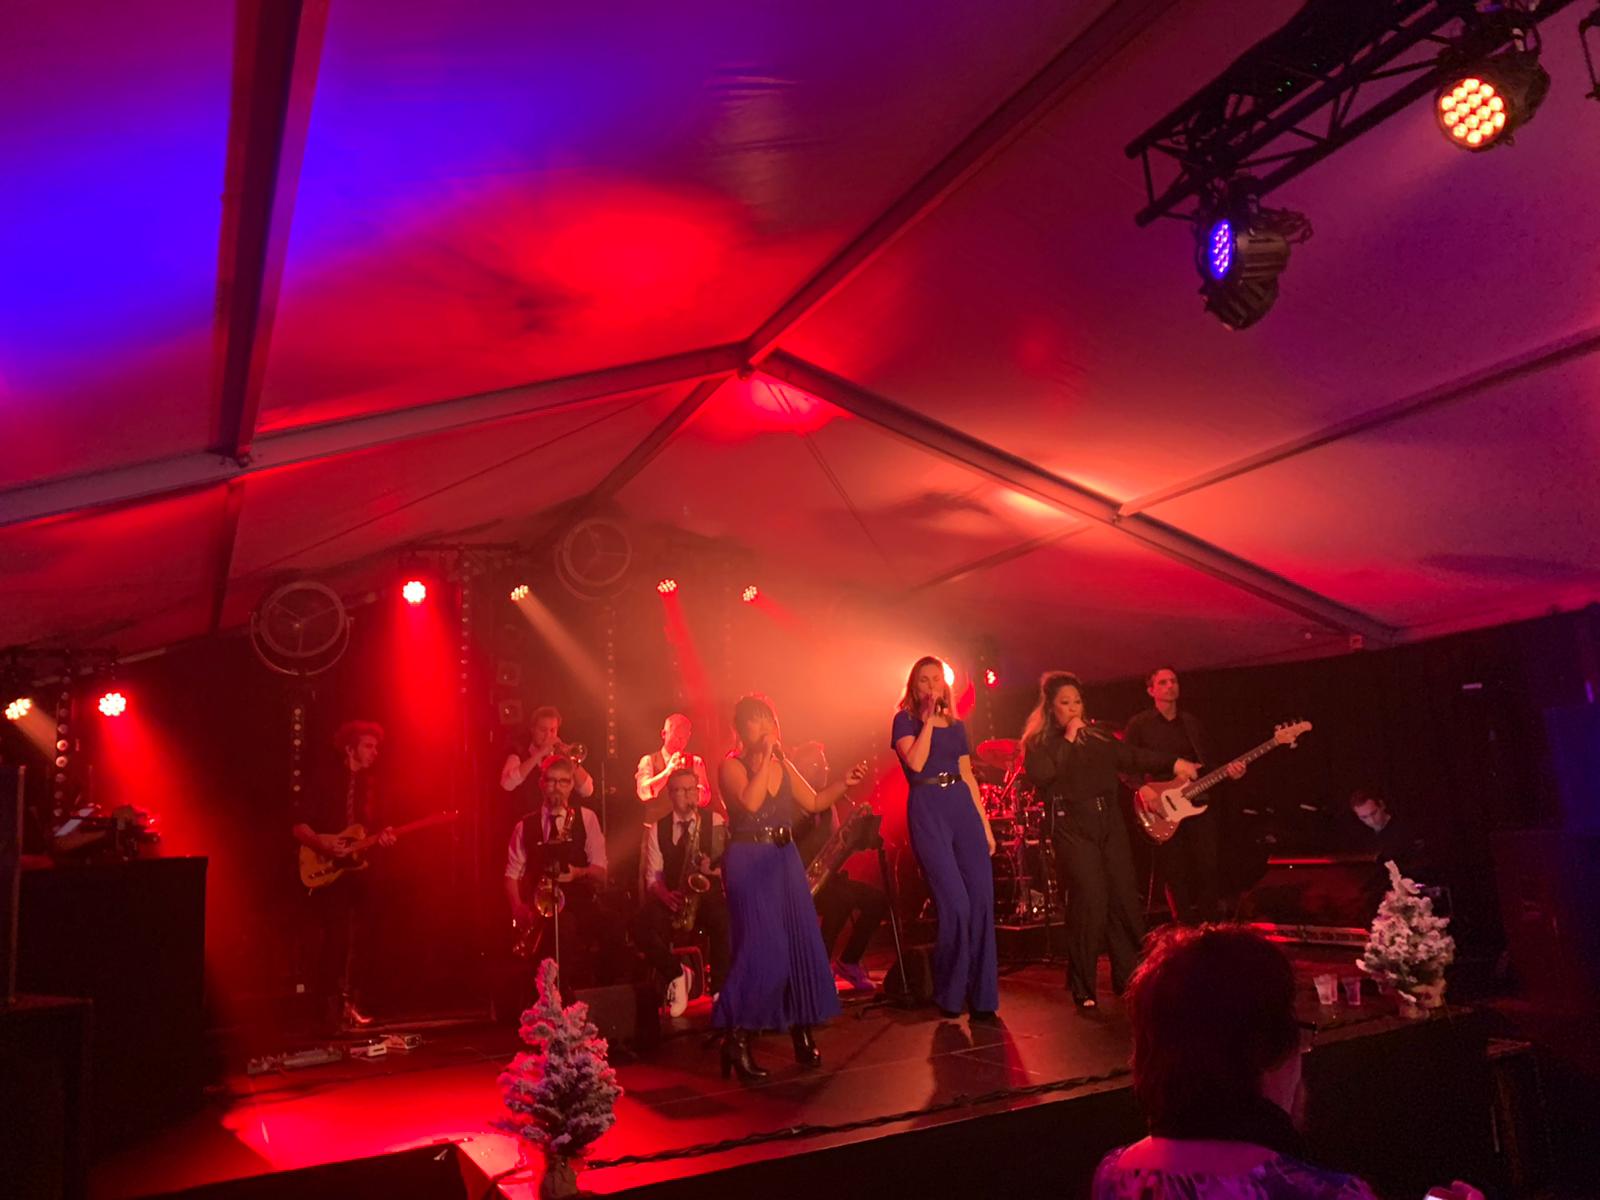 Event on trend met de leukste party-, cover-, of bigband | feestband.com